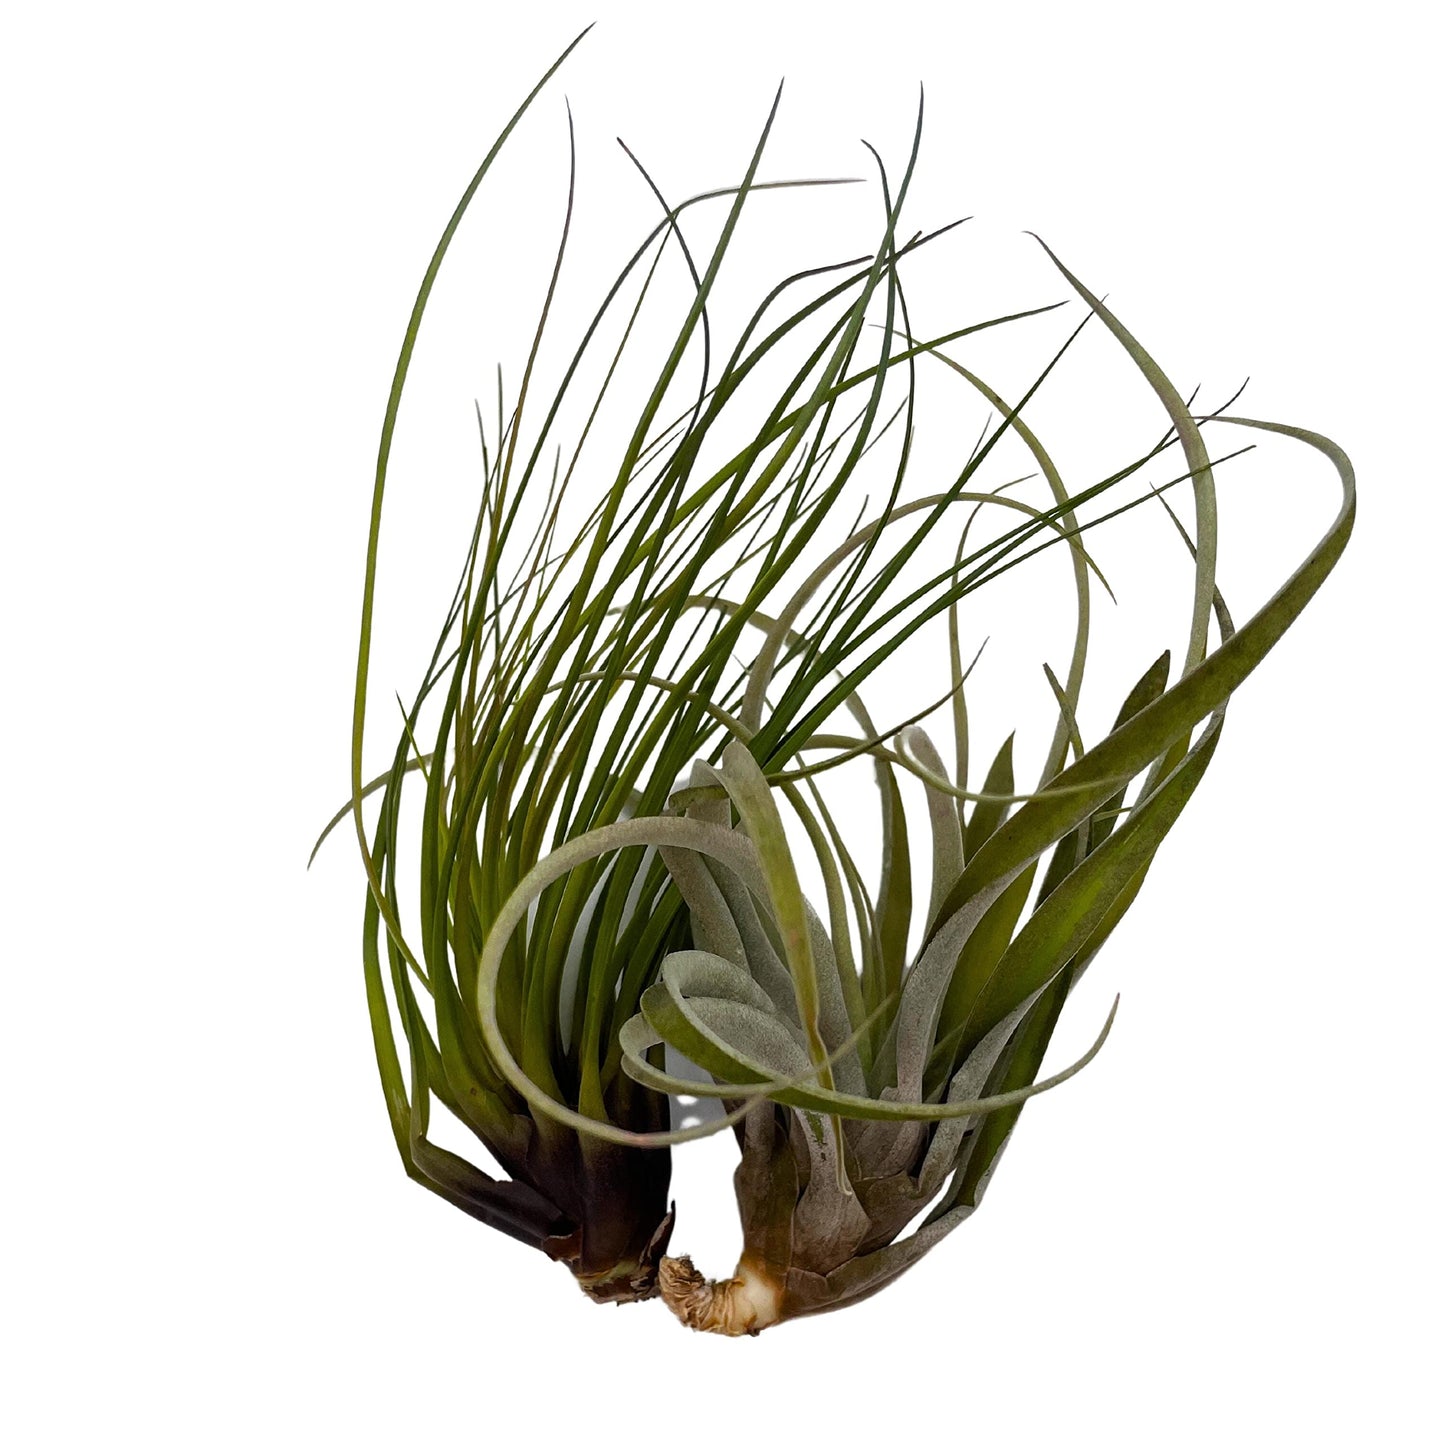 Large Tillandisa Assorment, Set of 2 Large-Sized Bare-Root airplants Ready to Mount and Grow